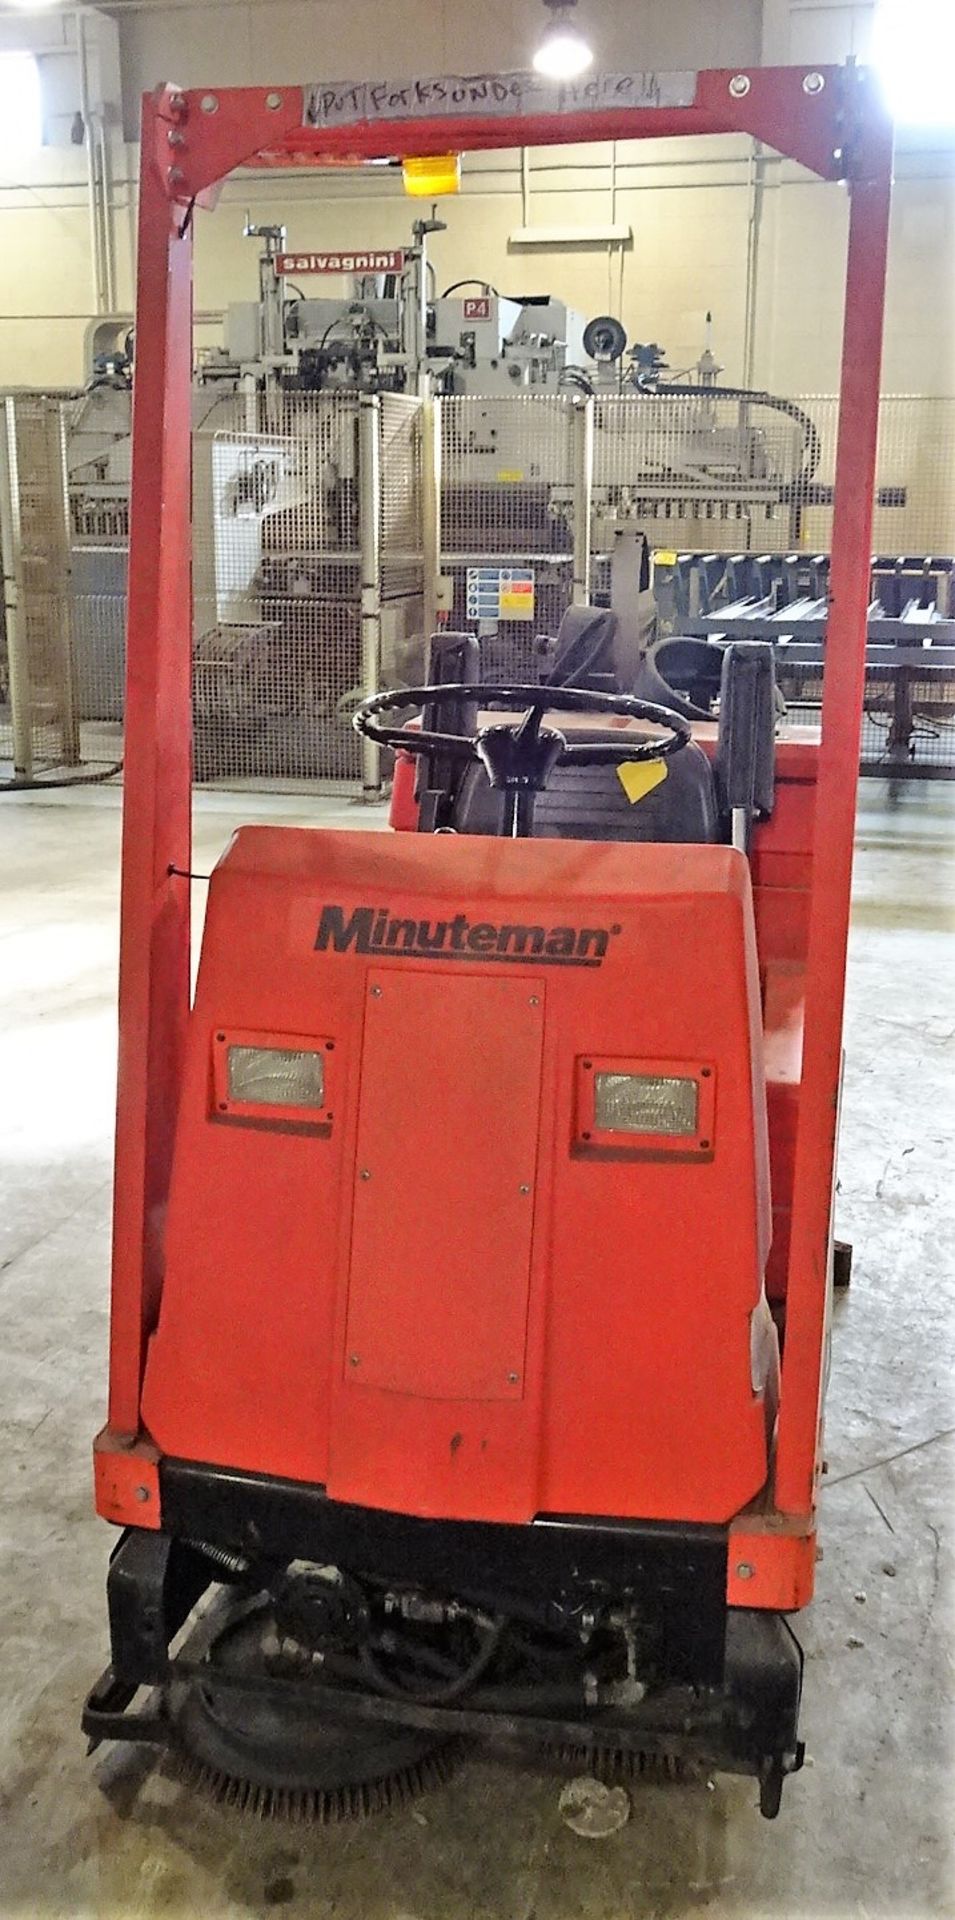 MINUTE MAN MDL. MC34000 16 HP PROPANE RIDE-ON FLOOR SCRUBBER, S/N: 74510006, (NO BATTERY, AS IS)